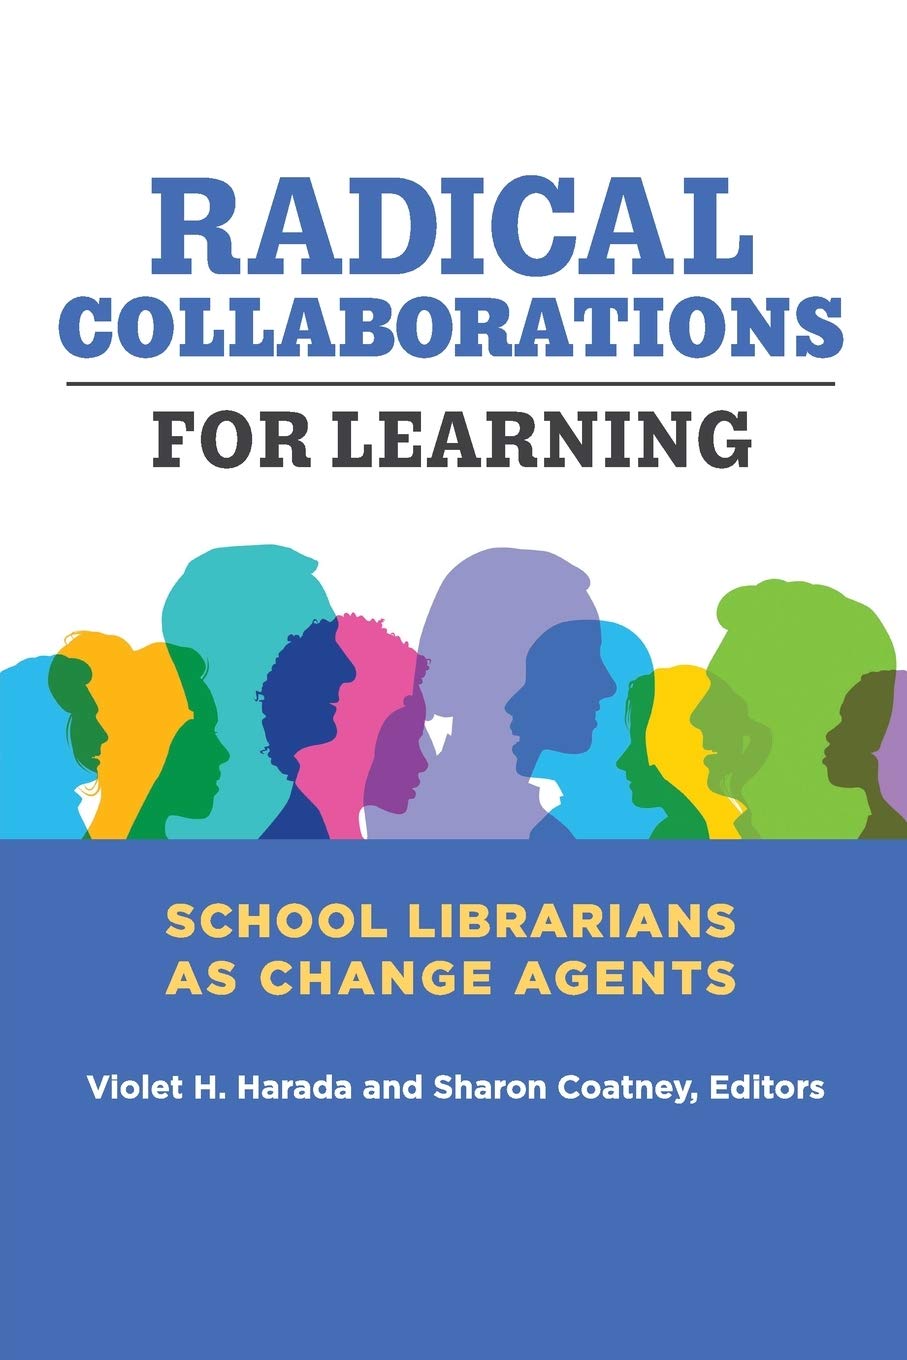 Radical collaborations for learning